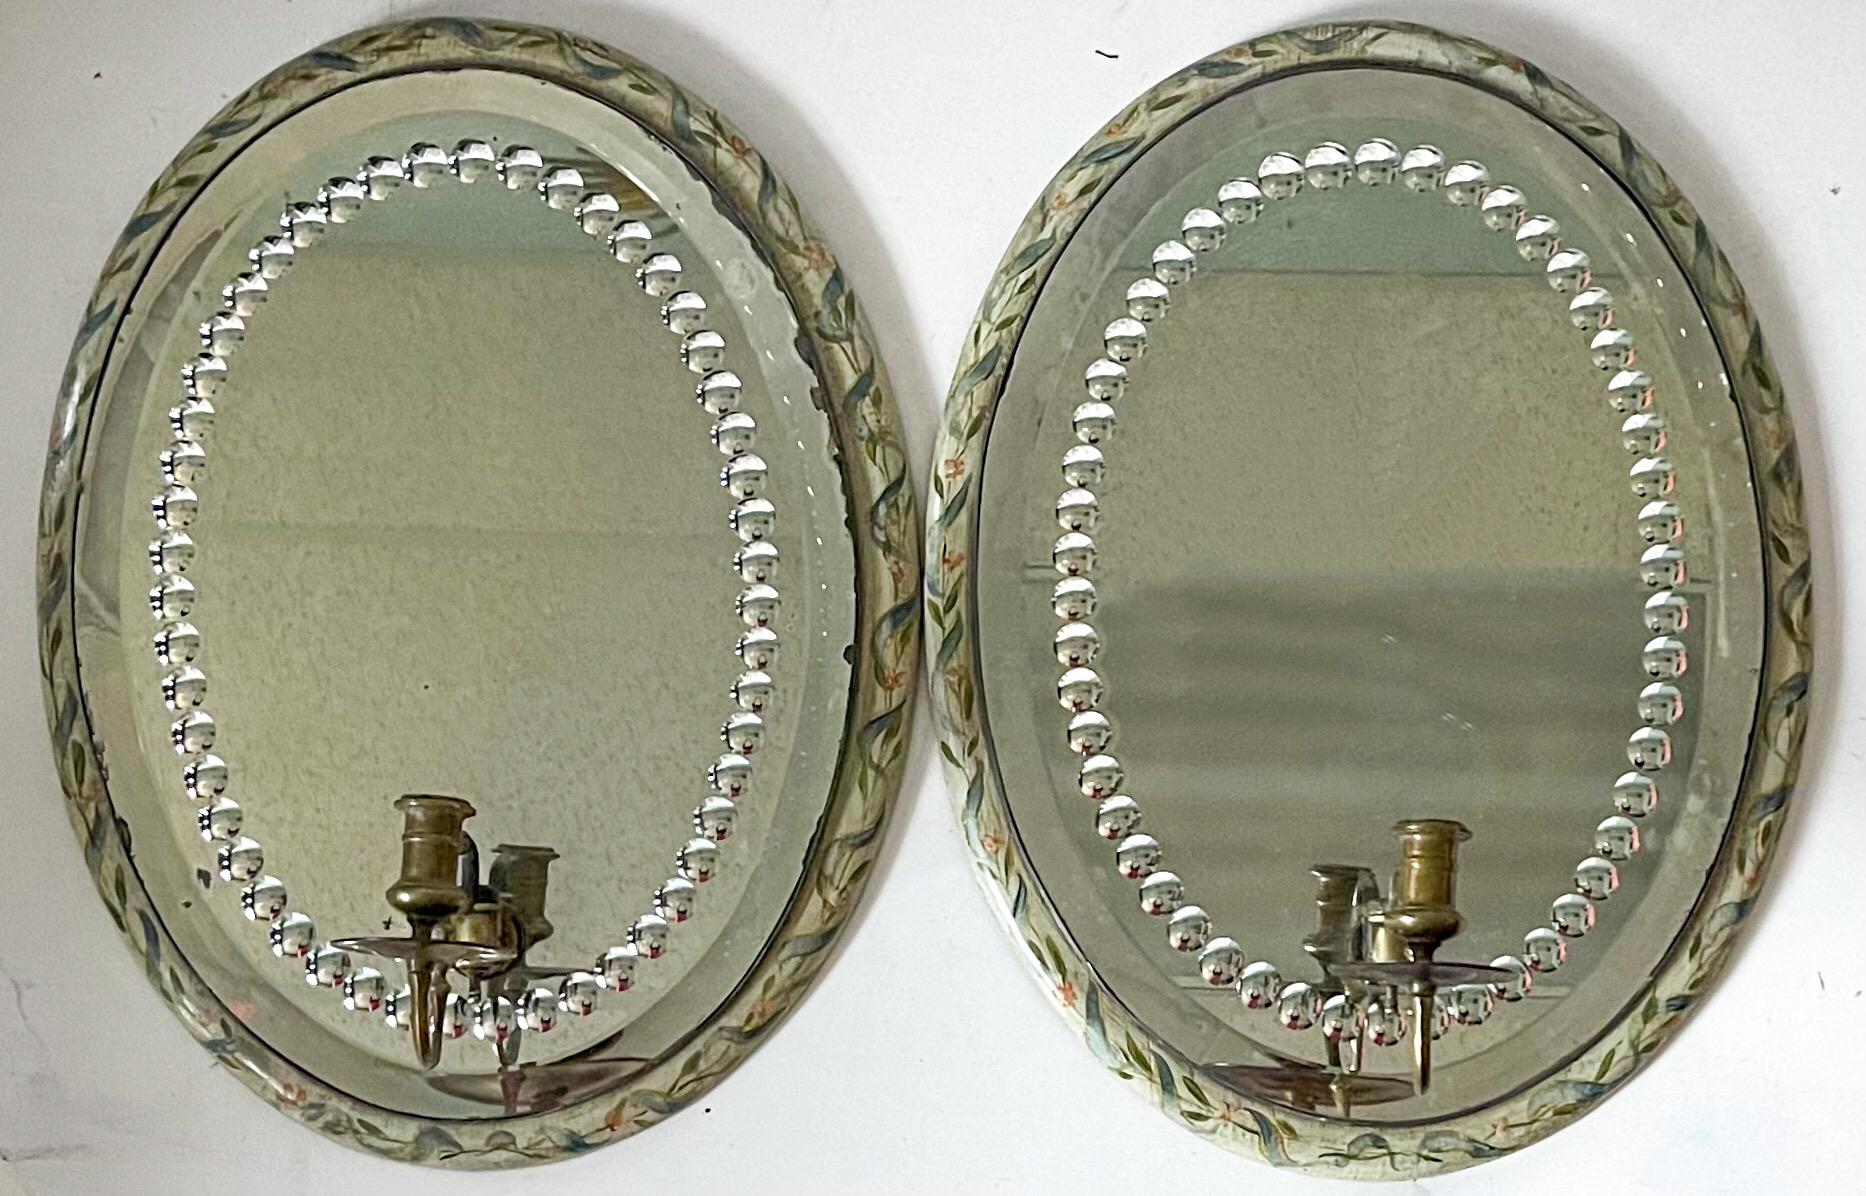 This isa pair of antique hand painted mirrored sconce with brass swing arm brass candle holder. The mirrored backs do show some age wear but no cracks. They are not electrified.